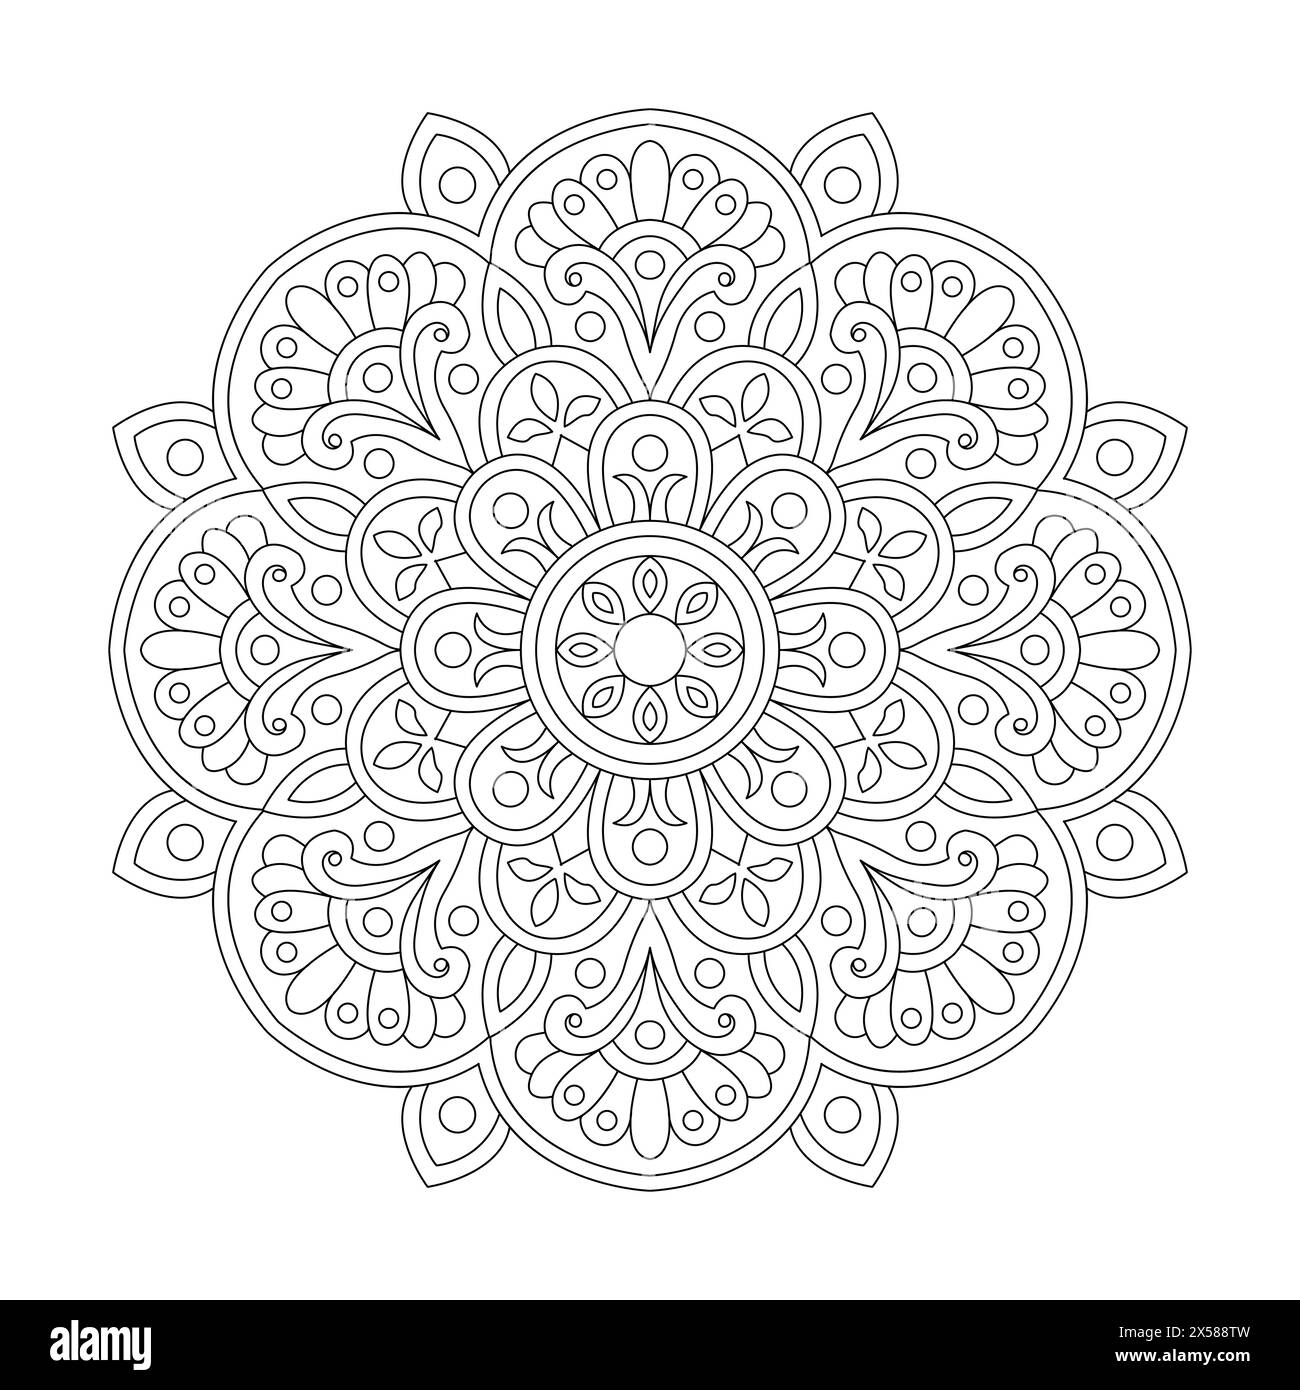 Flower Peaceful Mandala Design Coloring book page for kdp book interior, Editable vector file Stock Vector